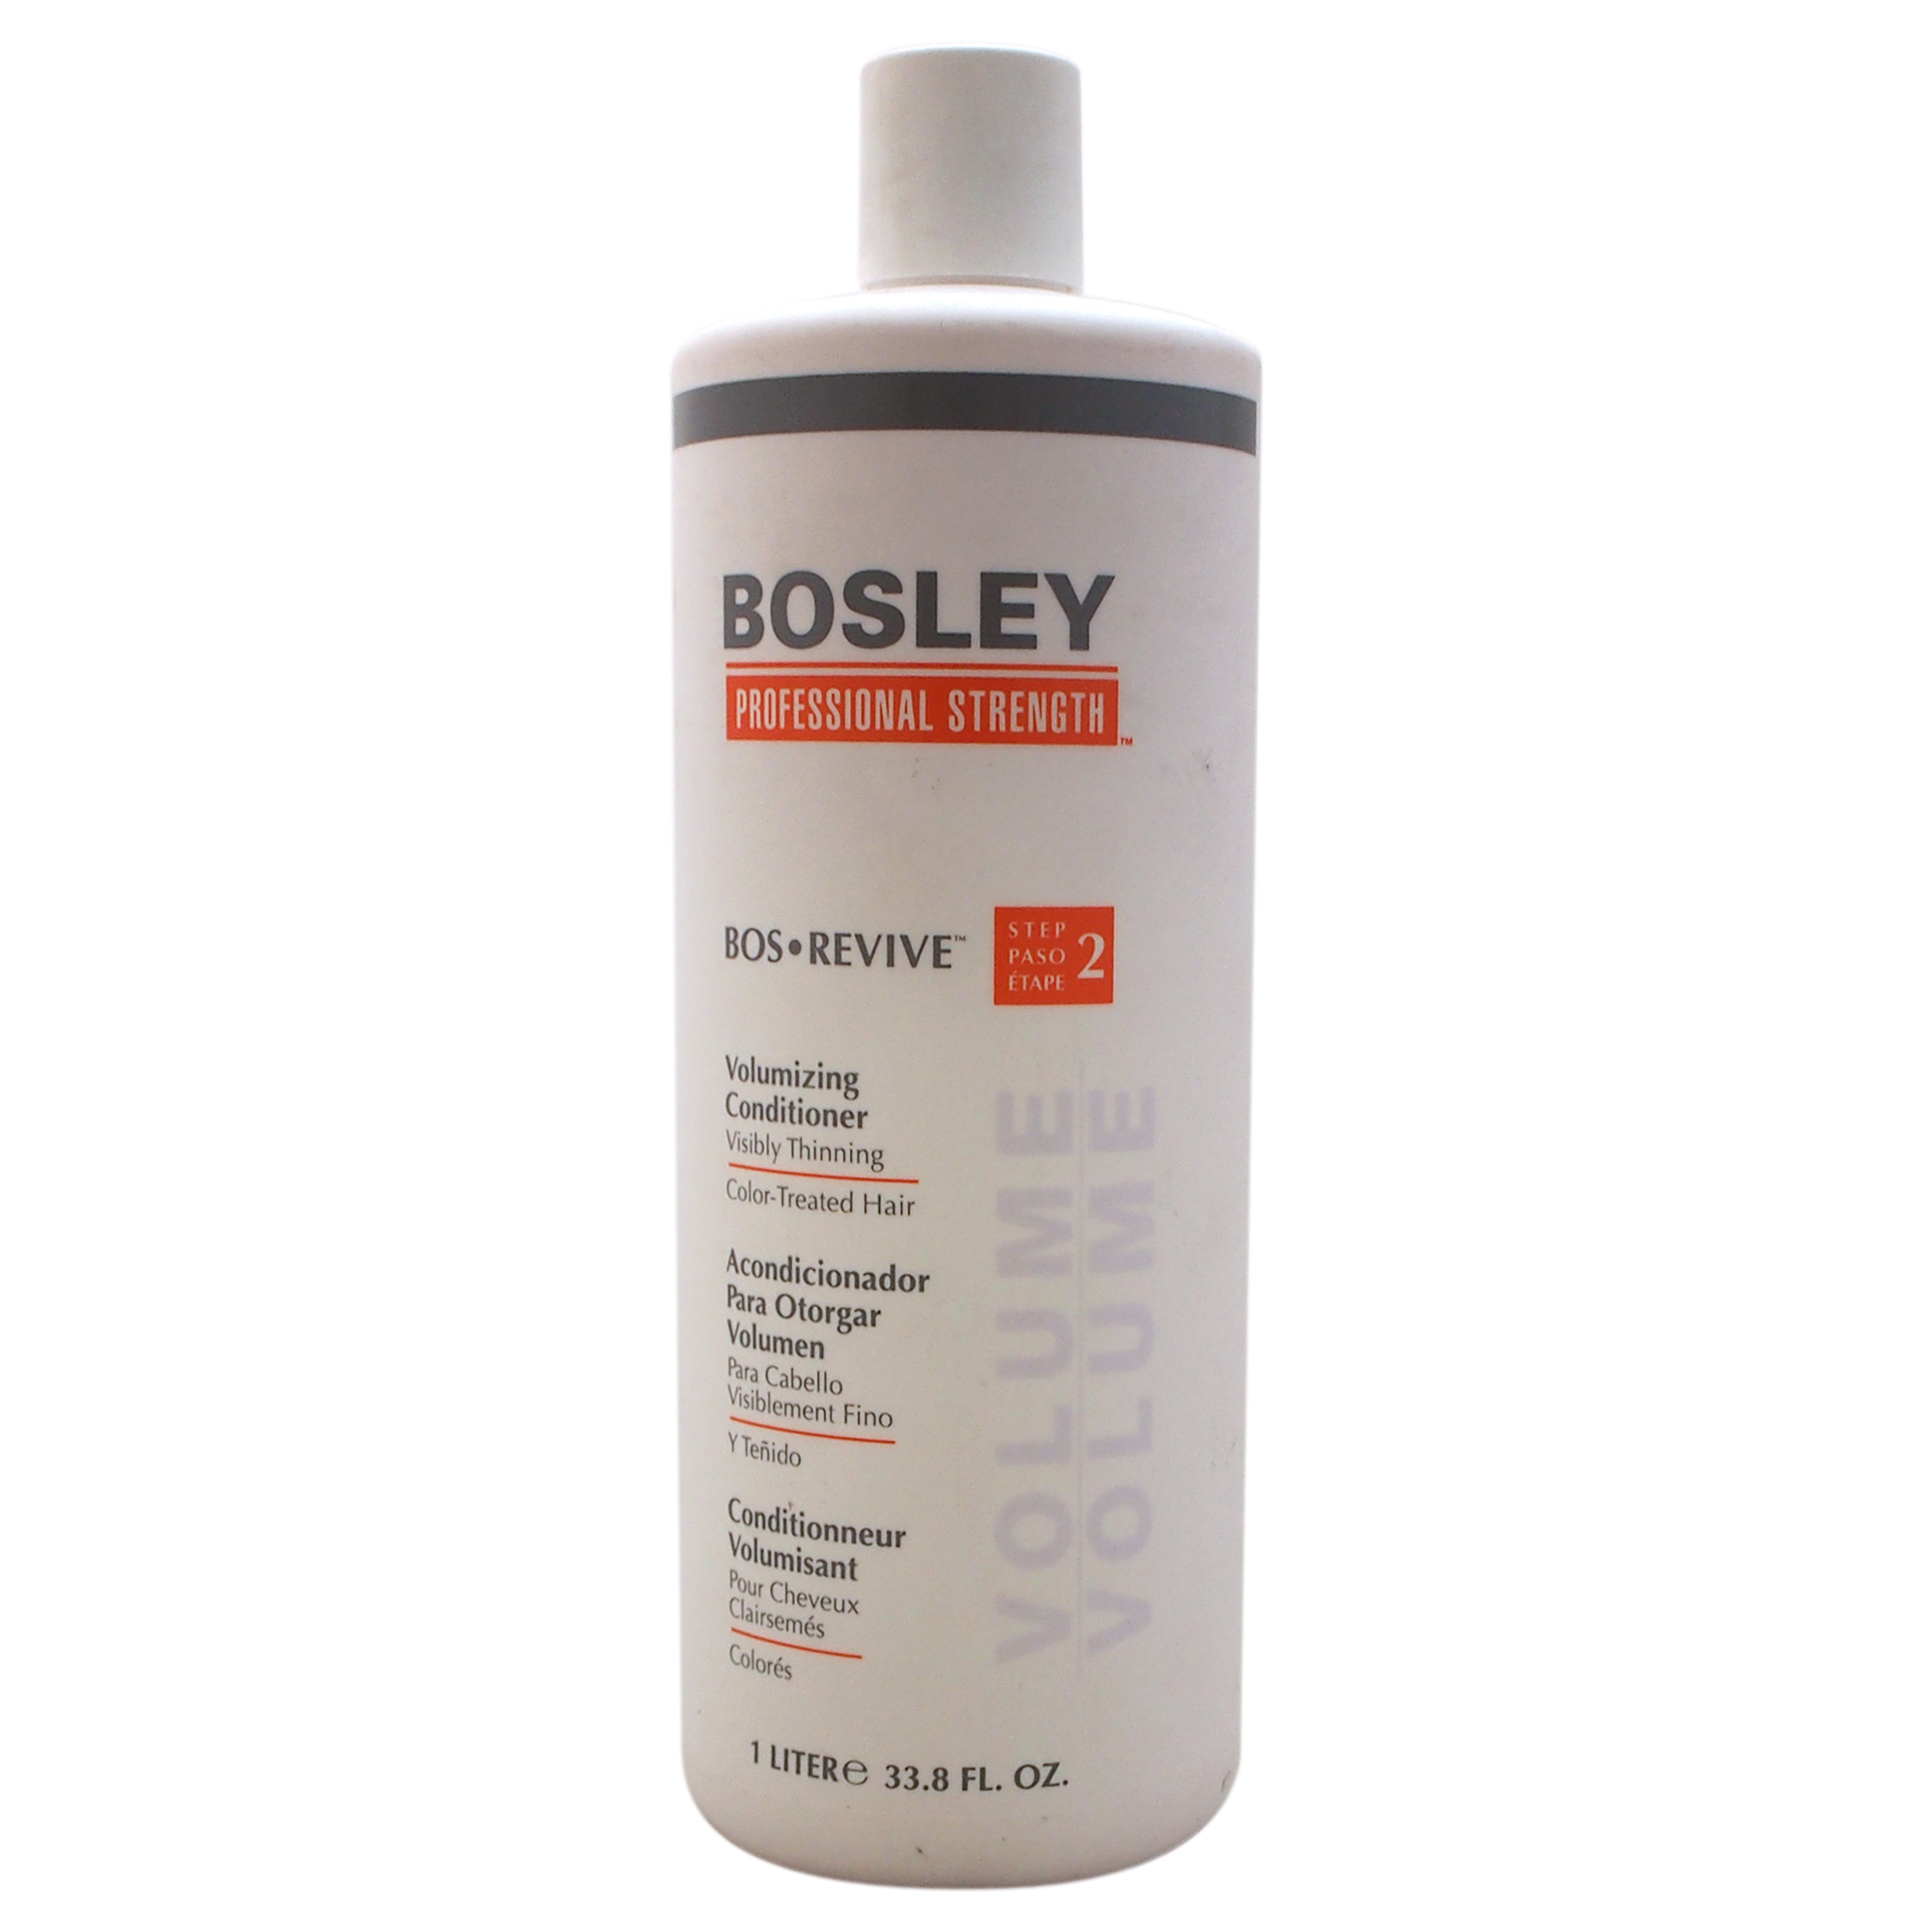 BOSLEY Bos Revive Volumizing Conditioner for Visibly Thinning Color-Treated Hair